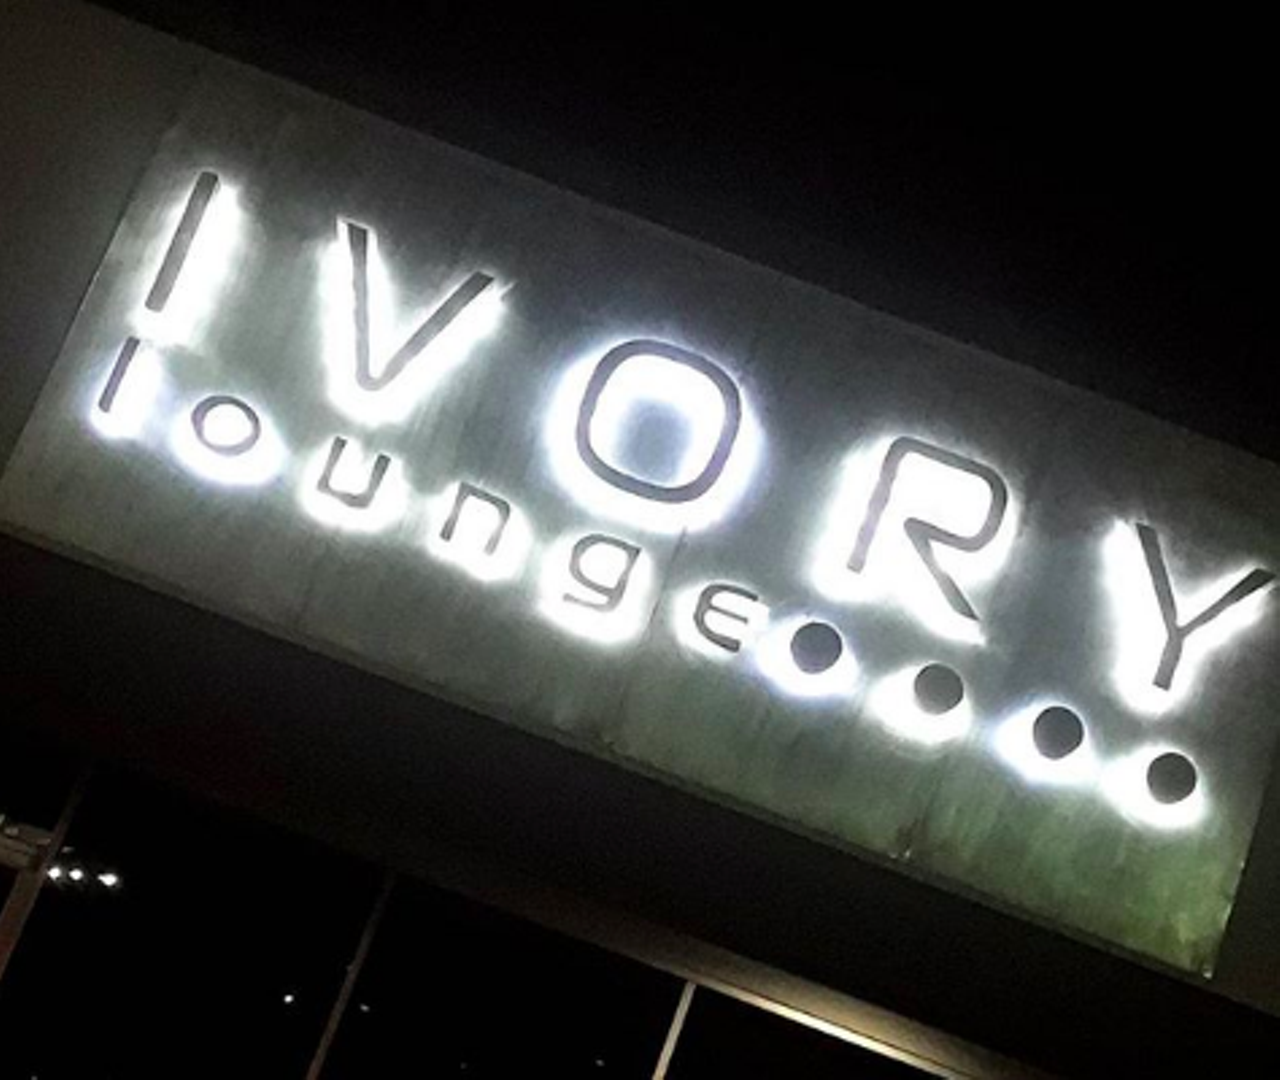 Ivory Lounge
5152 Fredericksburg Rd, (210) 340-4879, ivoryloungesa.com
You’ve heard all of the radio ads for Ivory Lounge. Most San Antonians either love or hate this place. All we’re gonna say is that this is a place to dance. The owner will most definitely clapback at you if you leave a bad review online. But if all you care about is dancing and having cheap drinks, you’re good at Ivory Lounge.
Photo via Instagram / djlightsout10